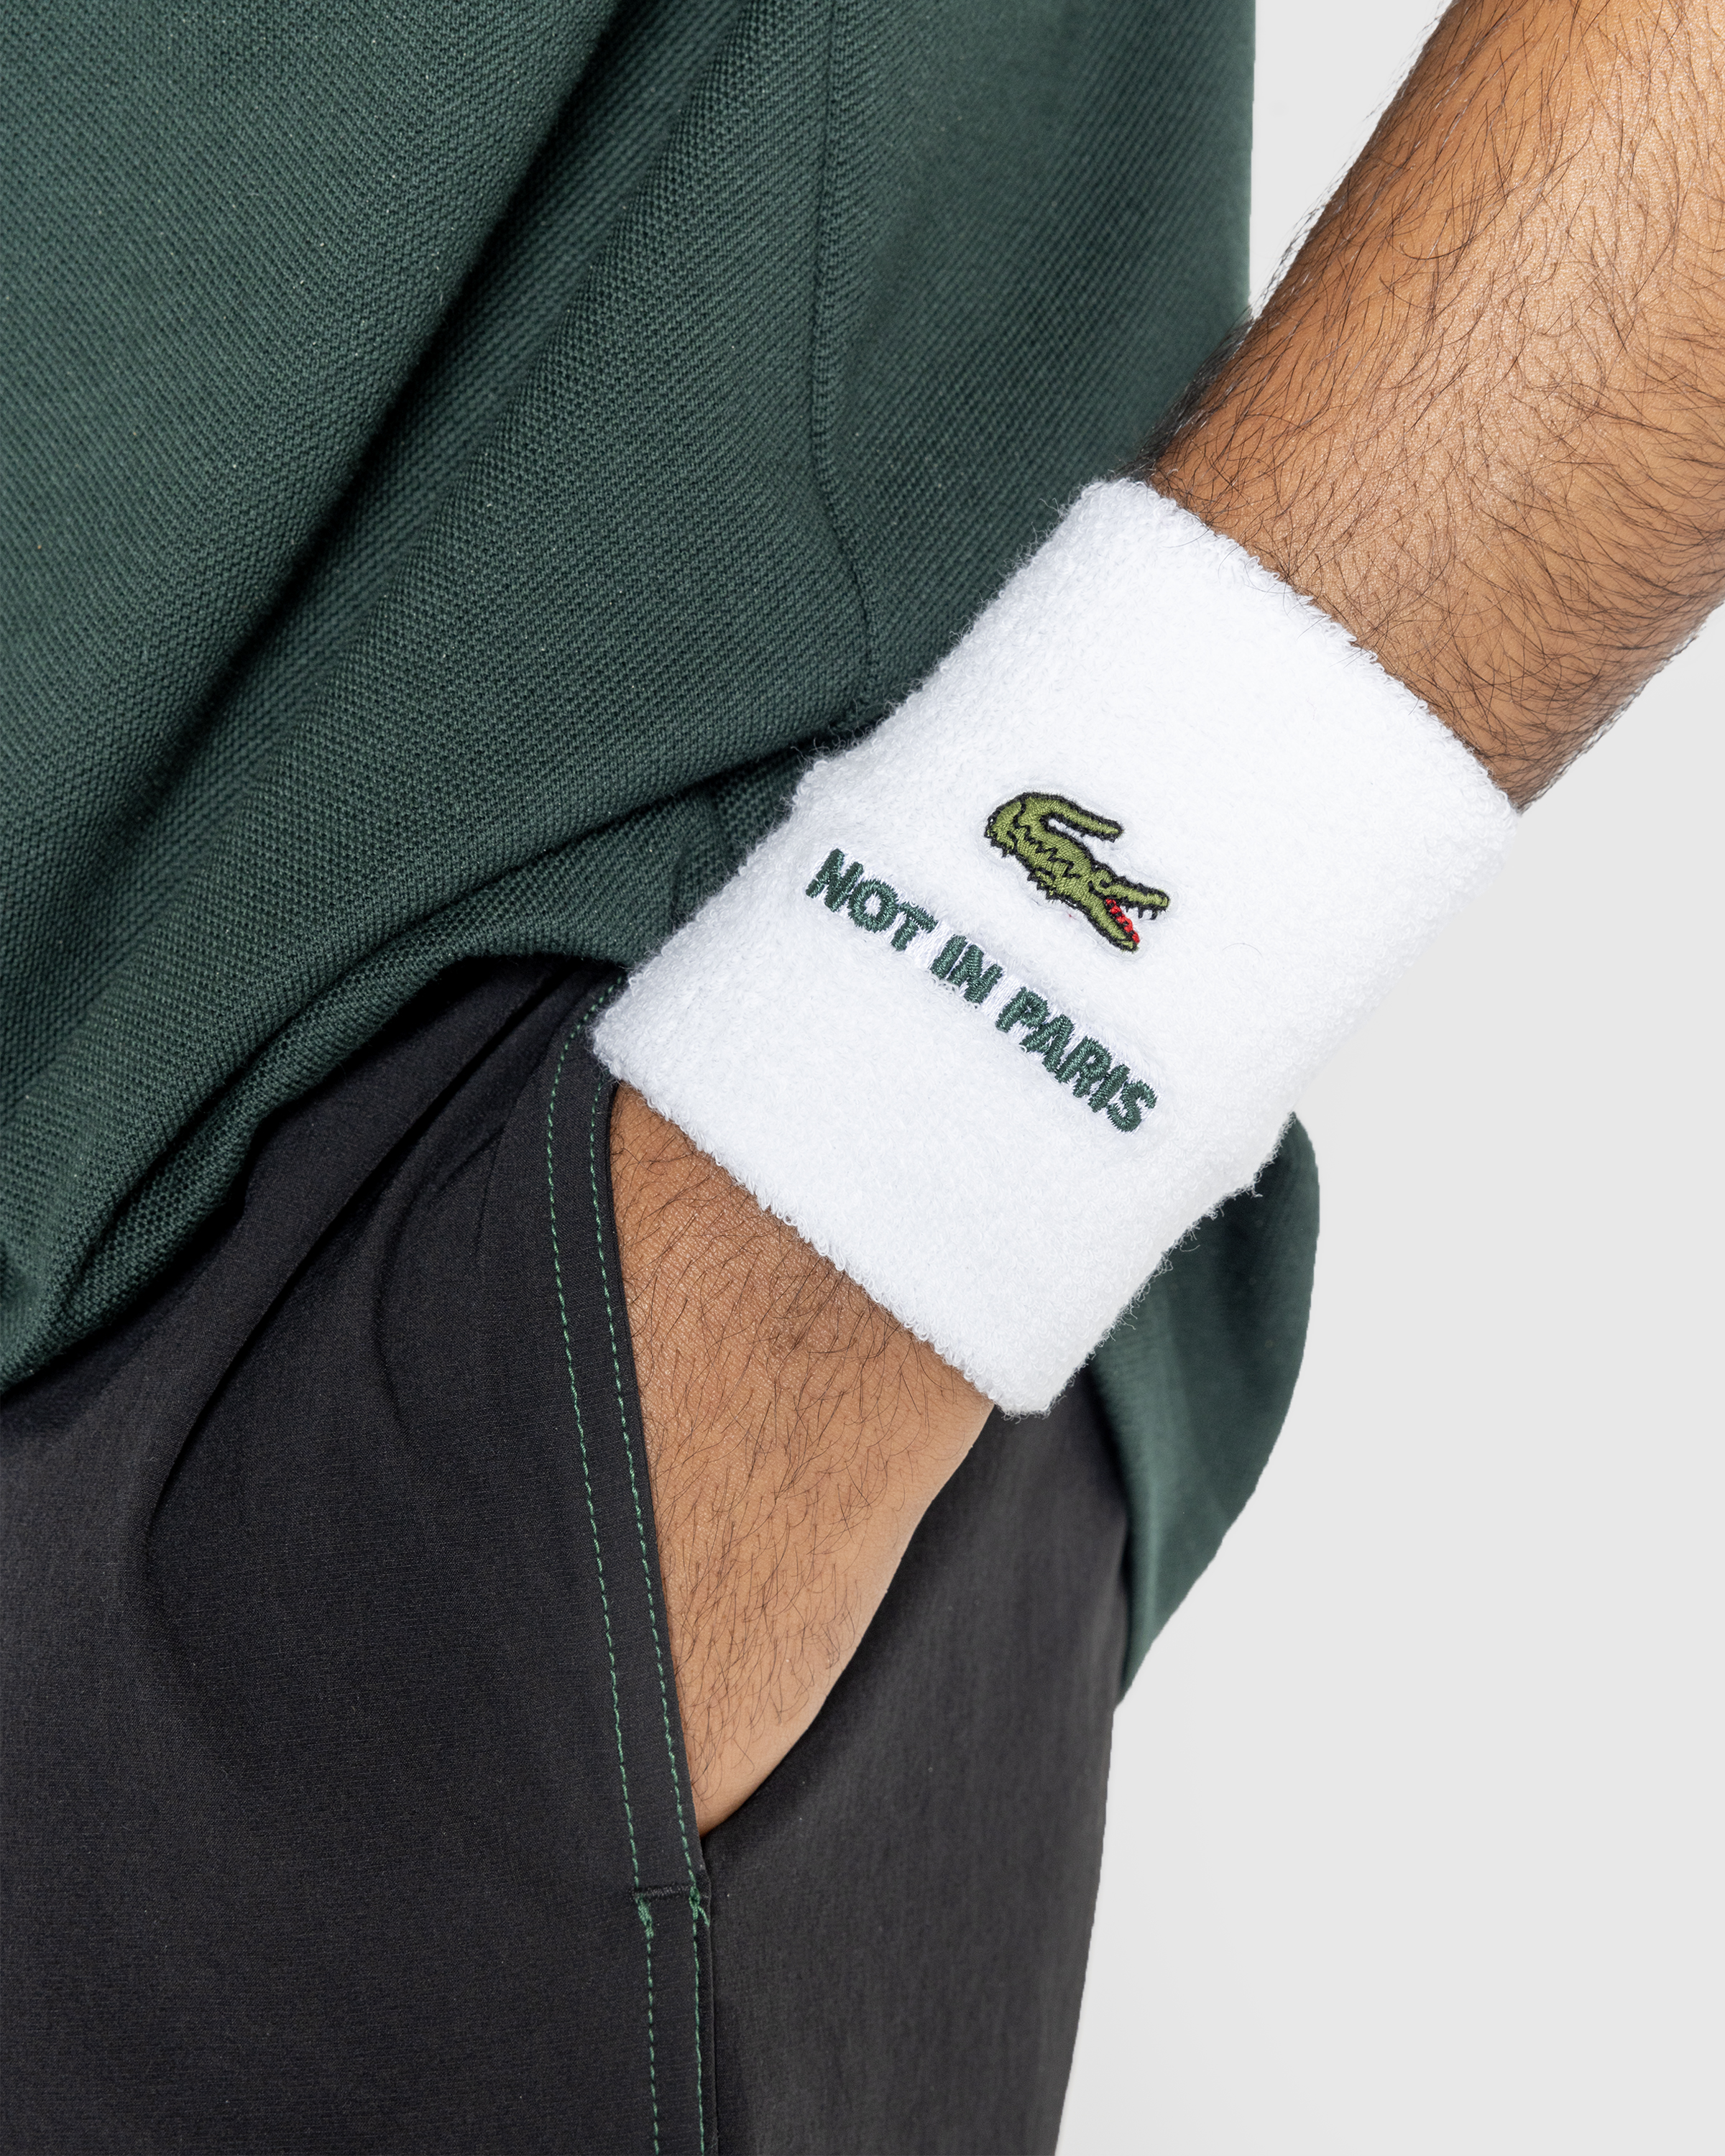 Lacoste x Highsnobiety – Not In Paris Sweatbands White - Sports Gear - White - Image 2